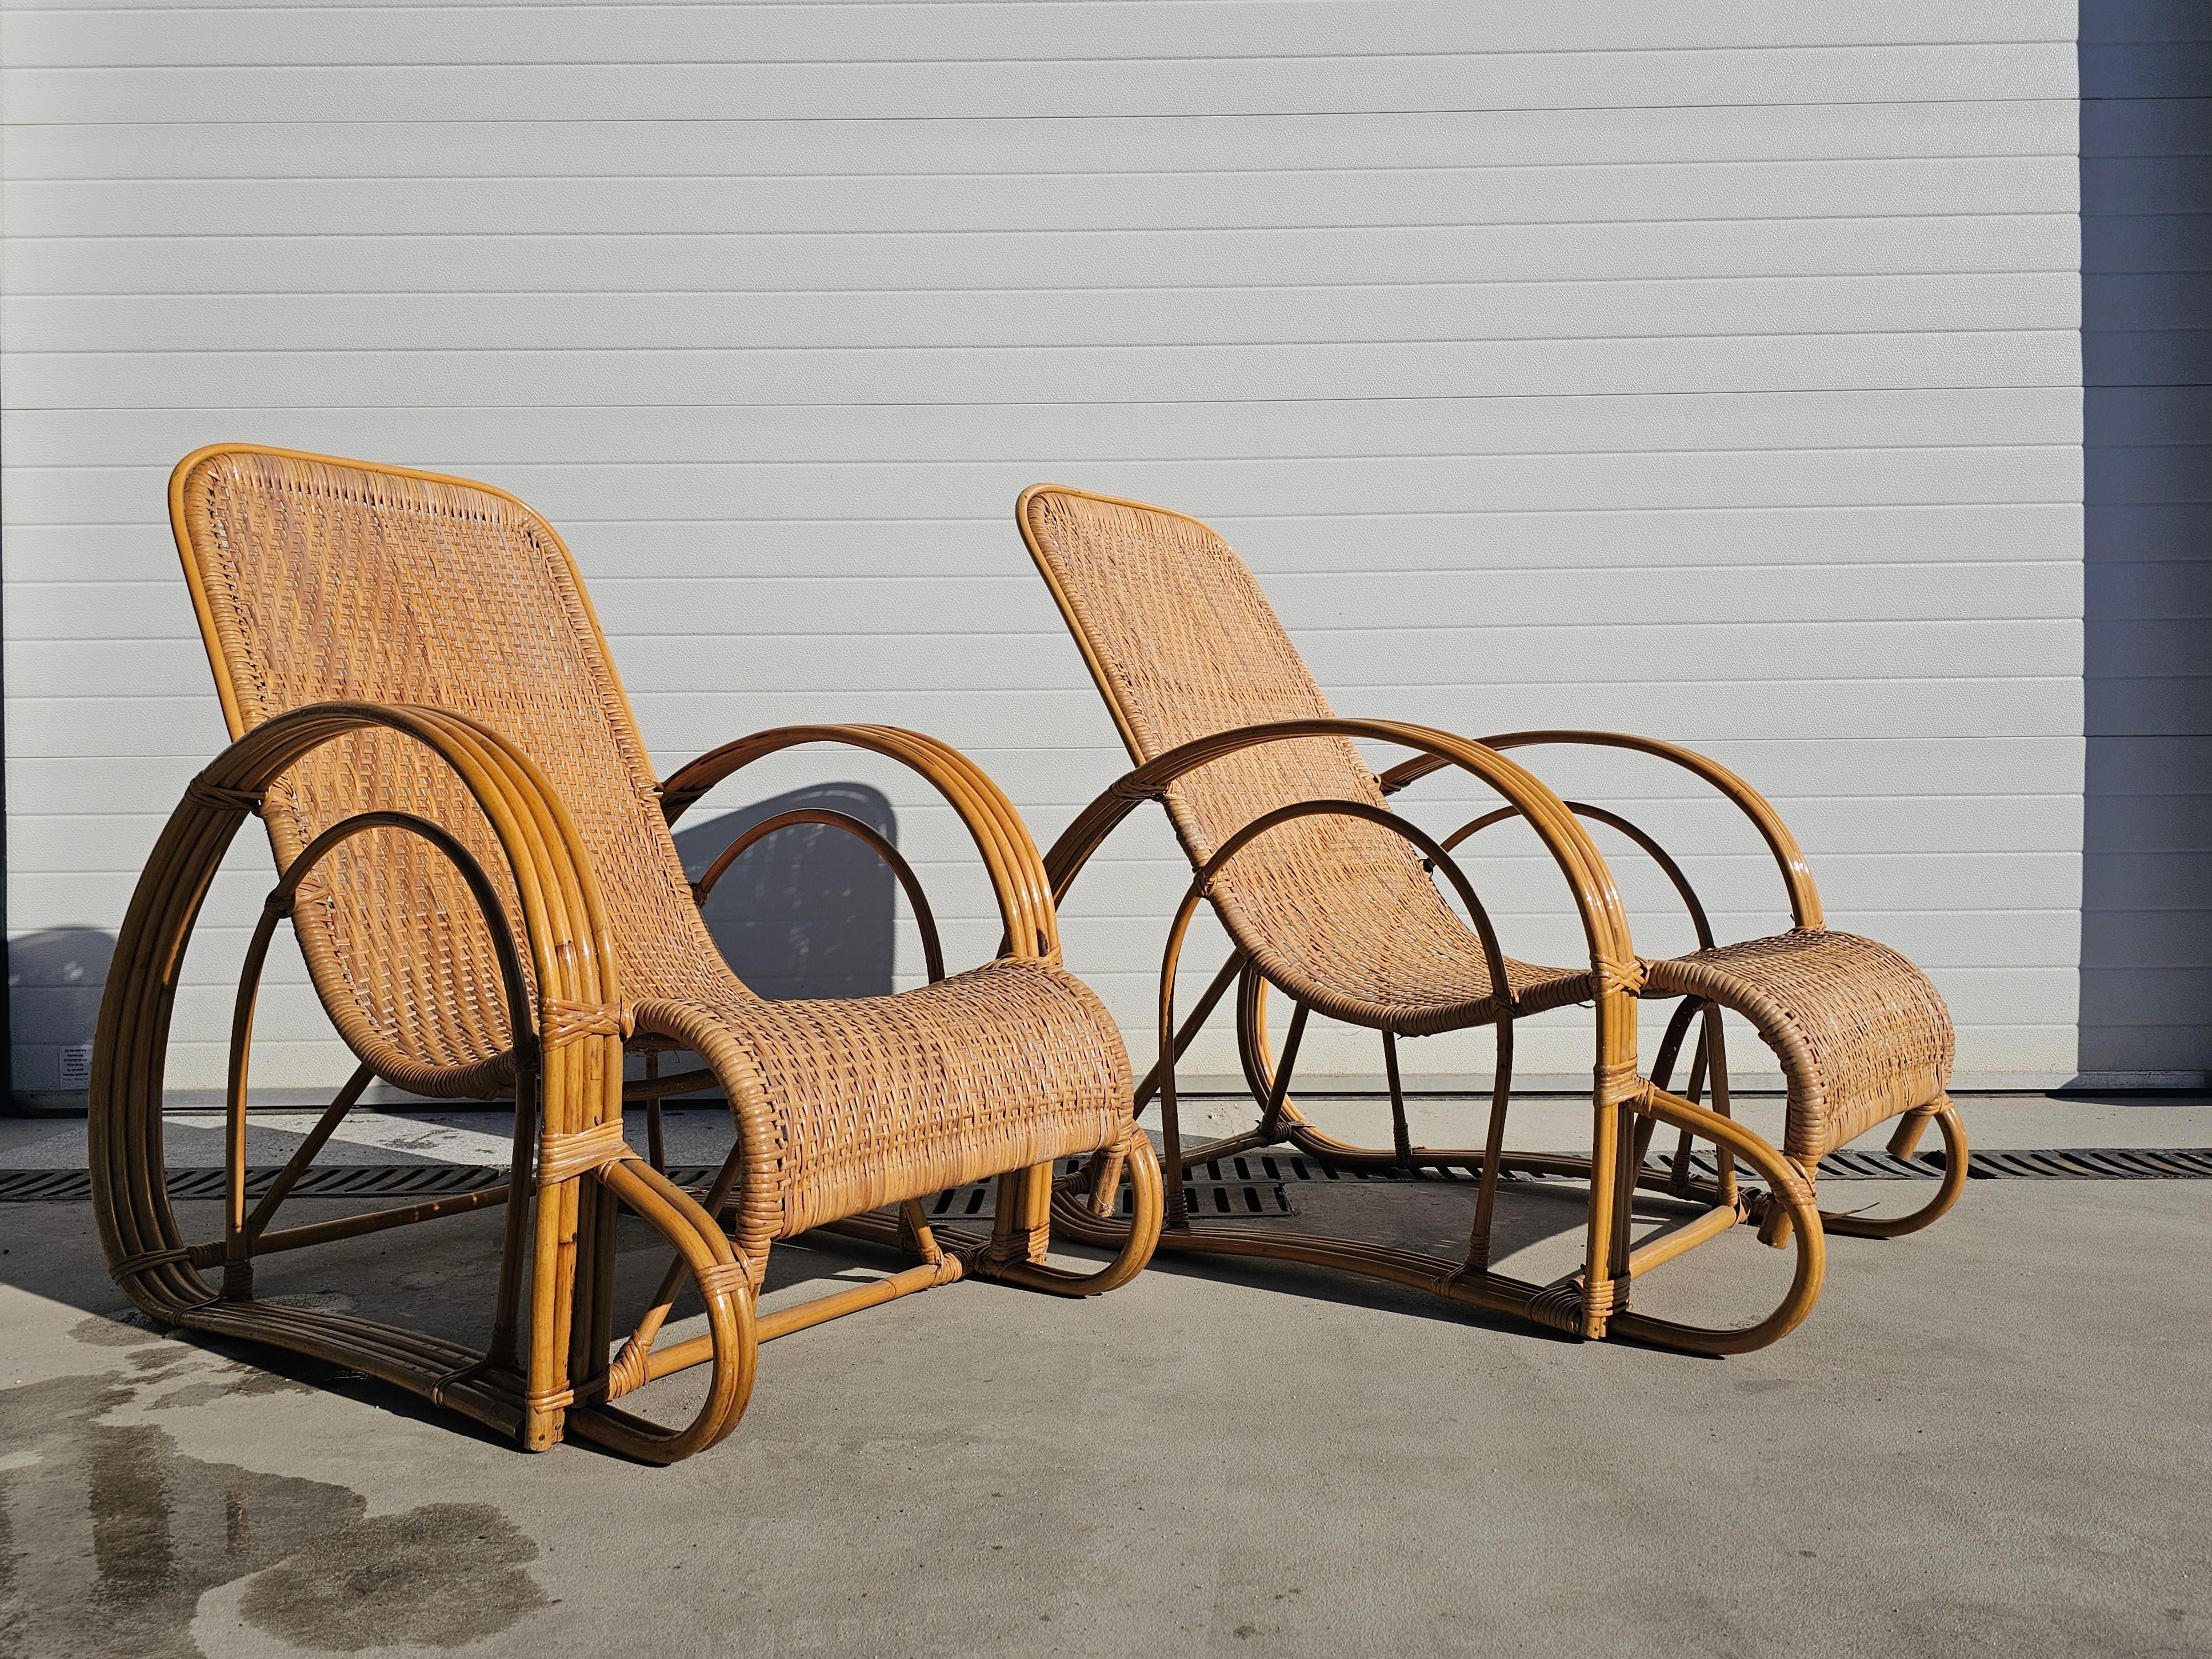 In this listing you will find a pair of absolutely stunning Mid Century Modern bamboo and rattan loungers. Their stunning design makes these loungers a real eye candy for all design lovers. Made in Italy in 1960s.

Loungers are in pretty good